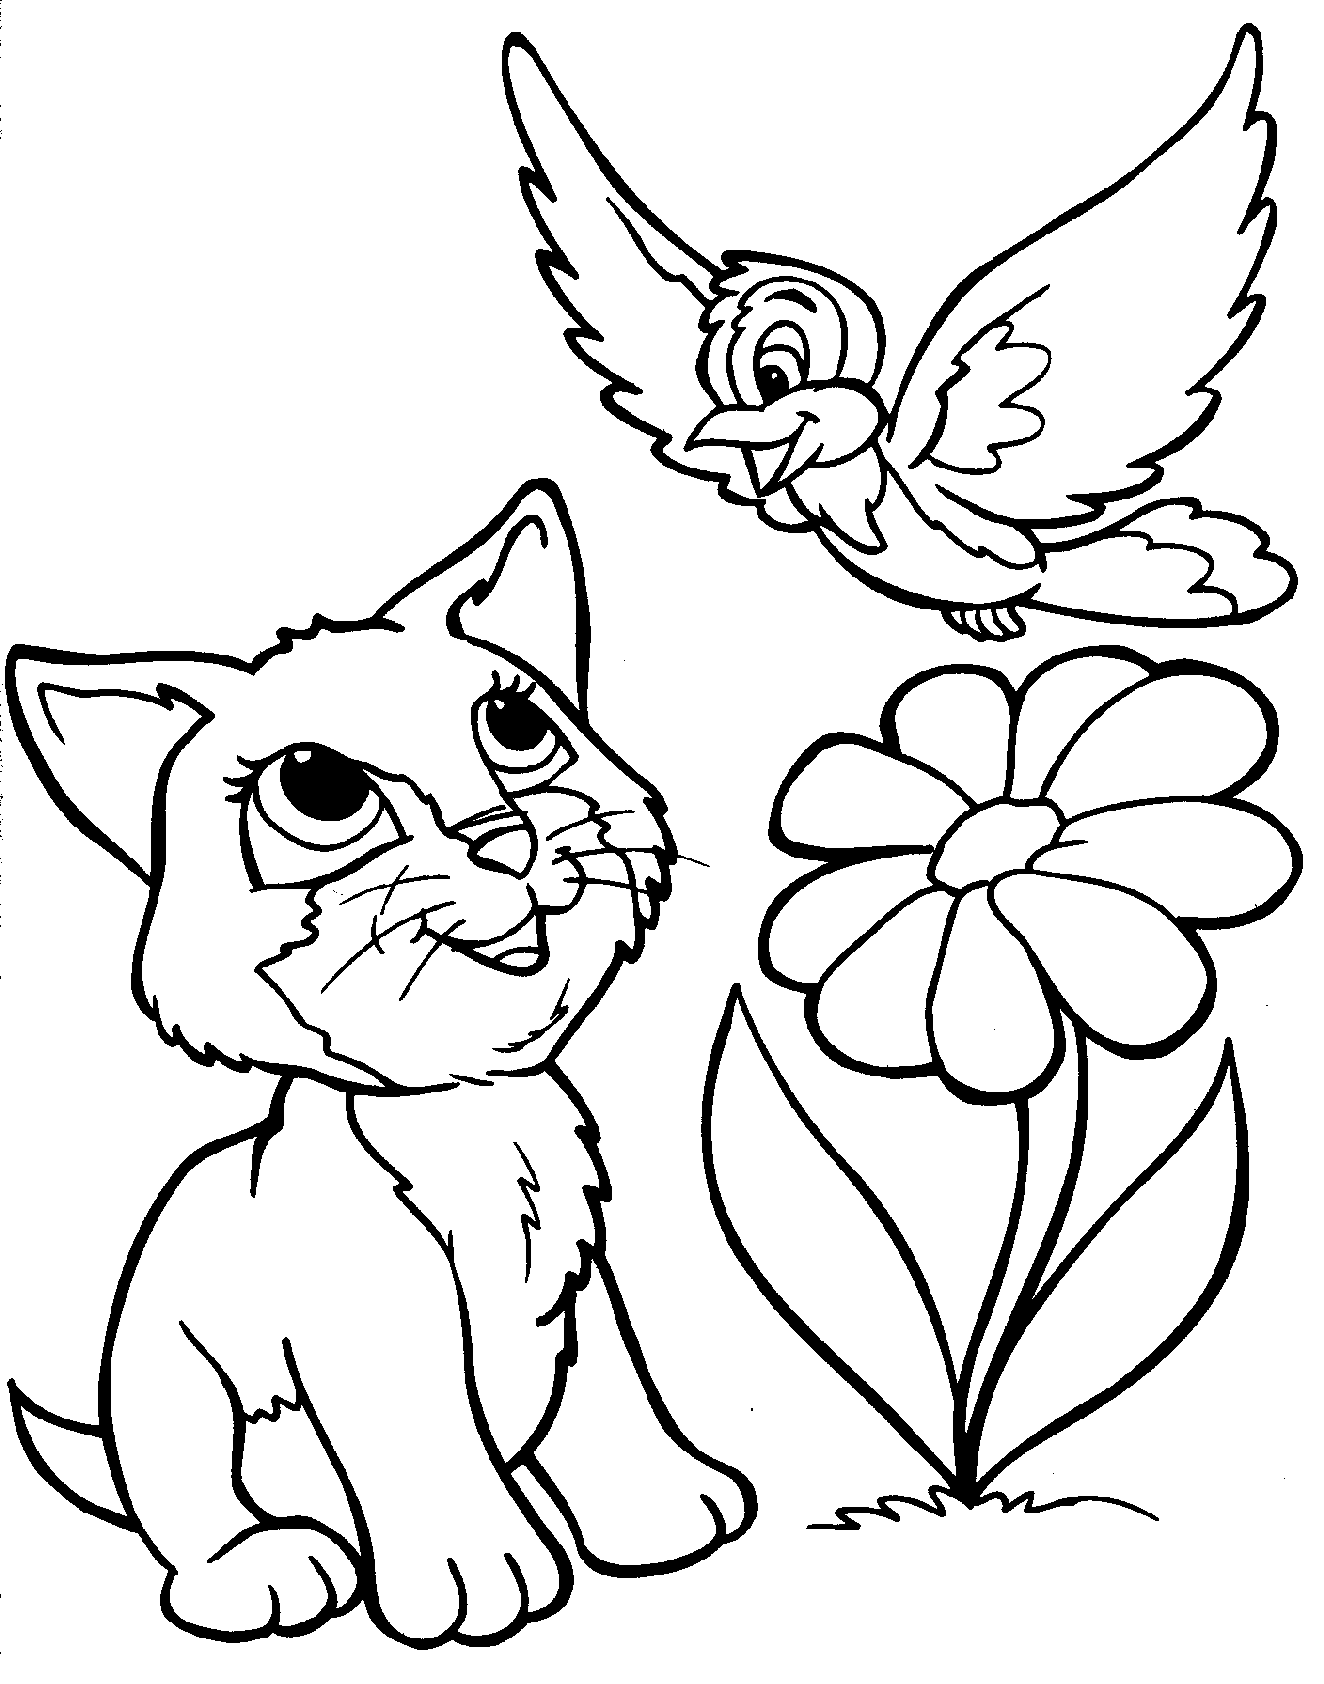 k is for kitten coloring pages-#38